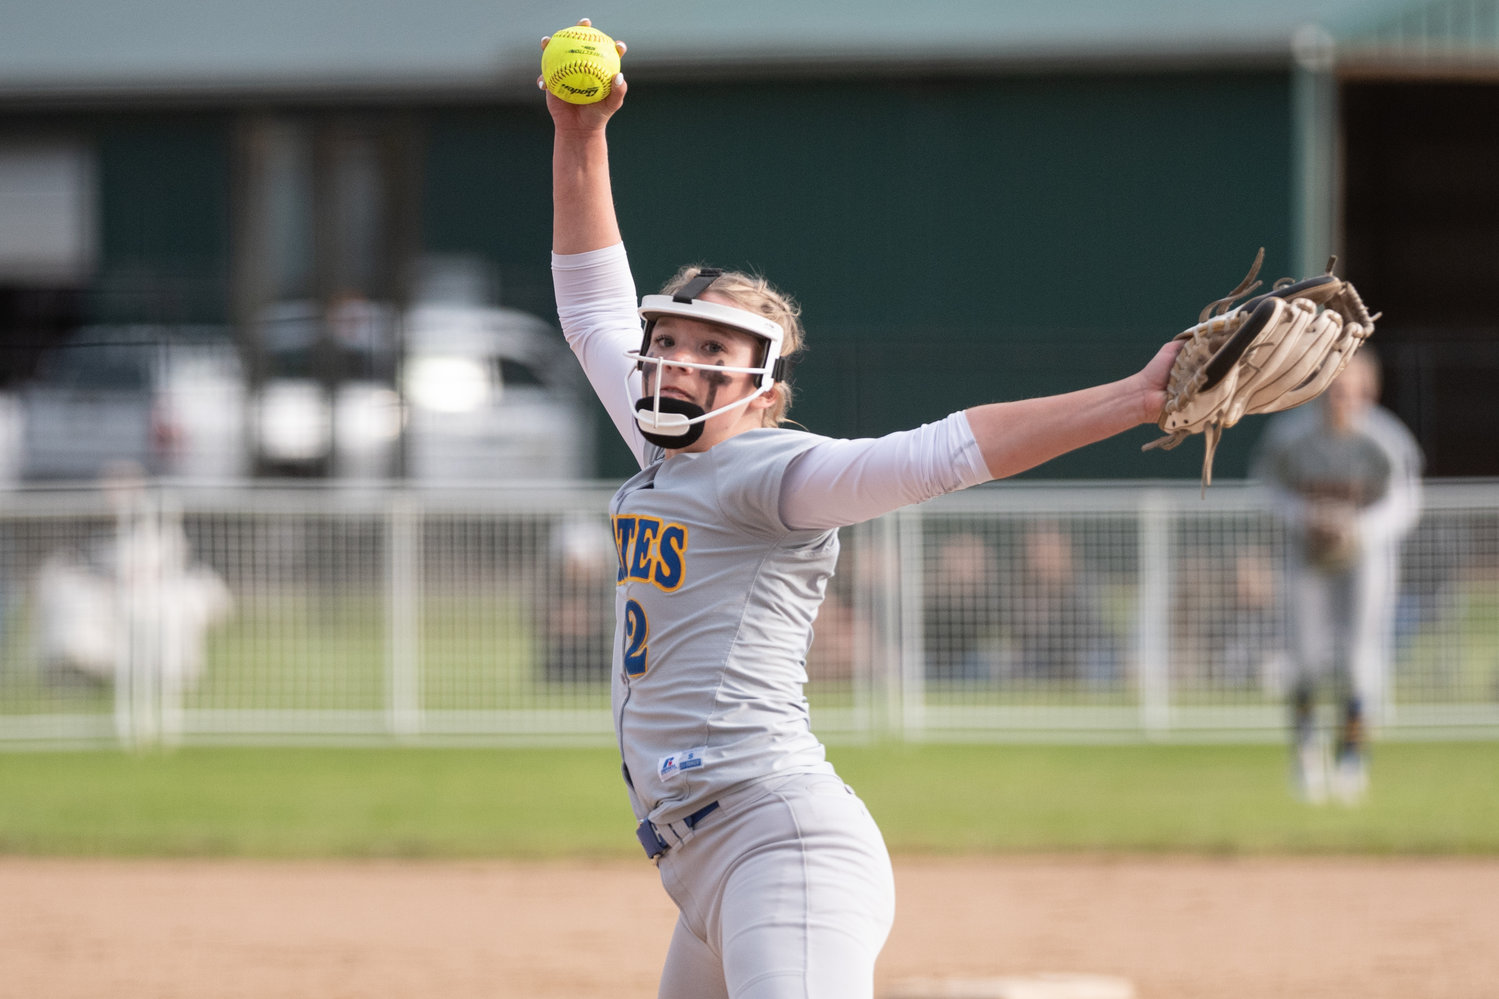 Adna's Ava Simms winds up to deliver a pitch against PWV in the 2B District 4 softball championship game at Fort Borst Park in Centralia May 21.